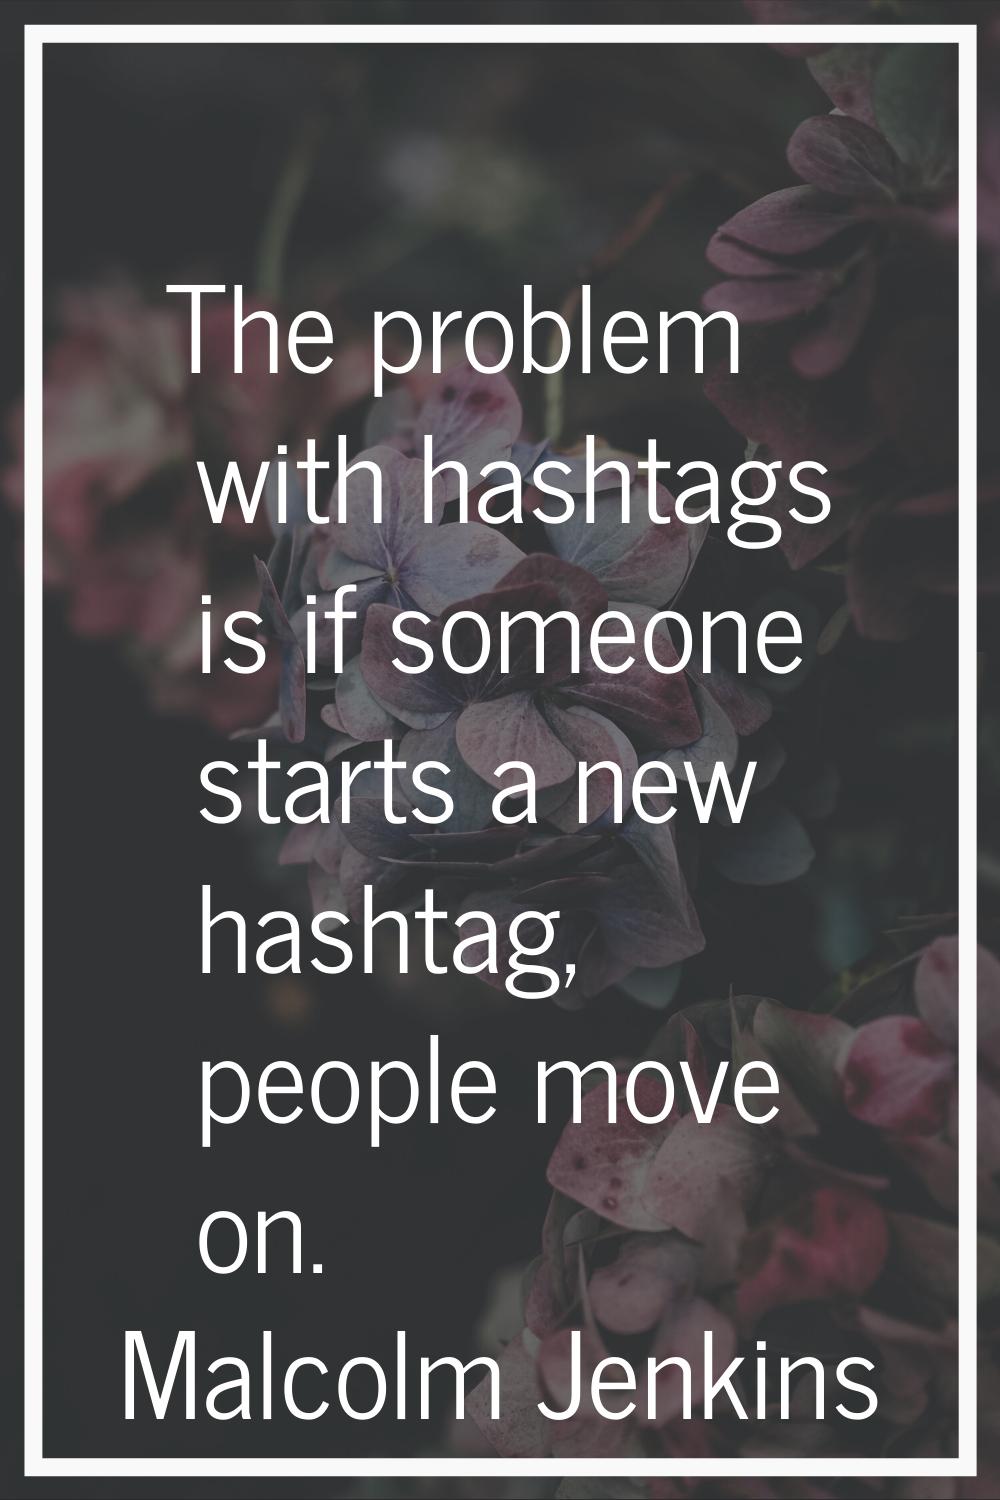 The problem with hashtags is if someone starts a new hashtag, people move on.